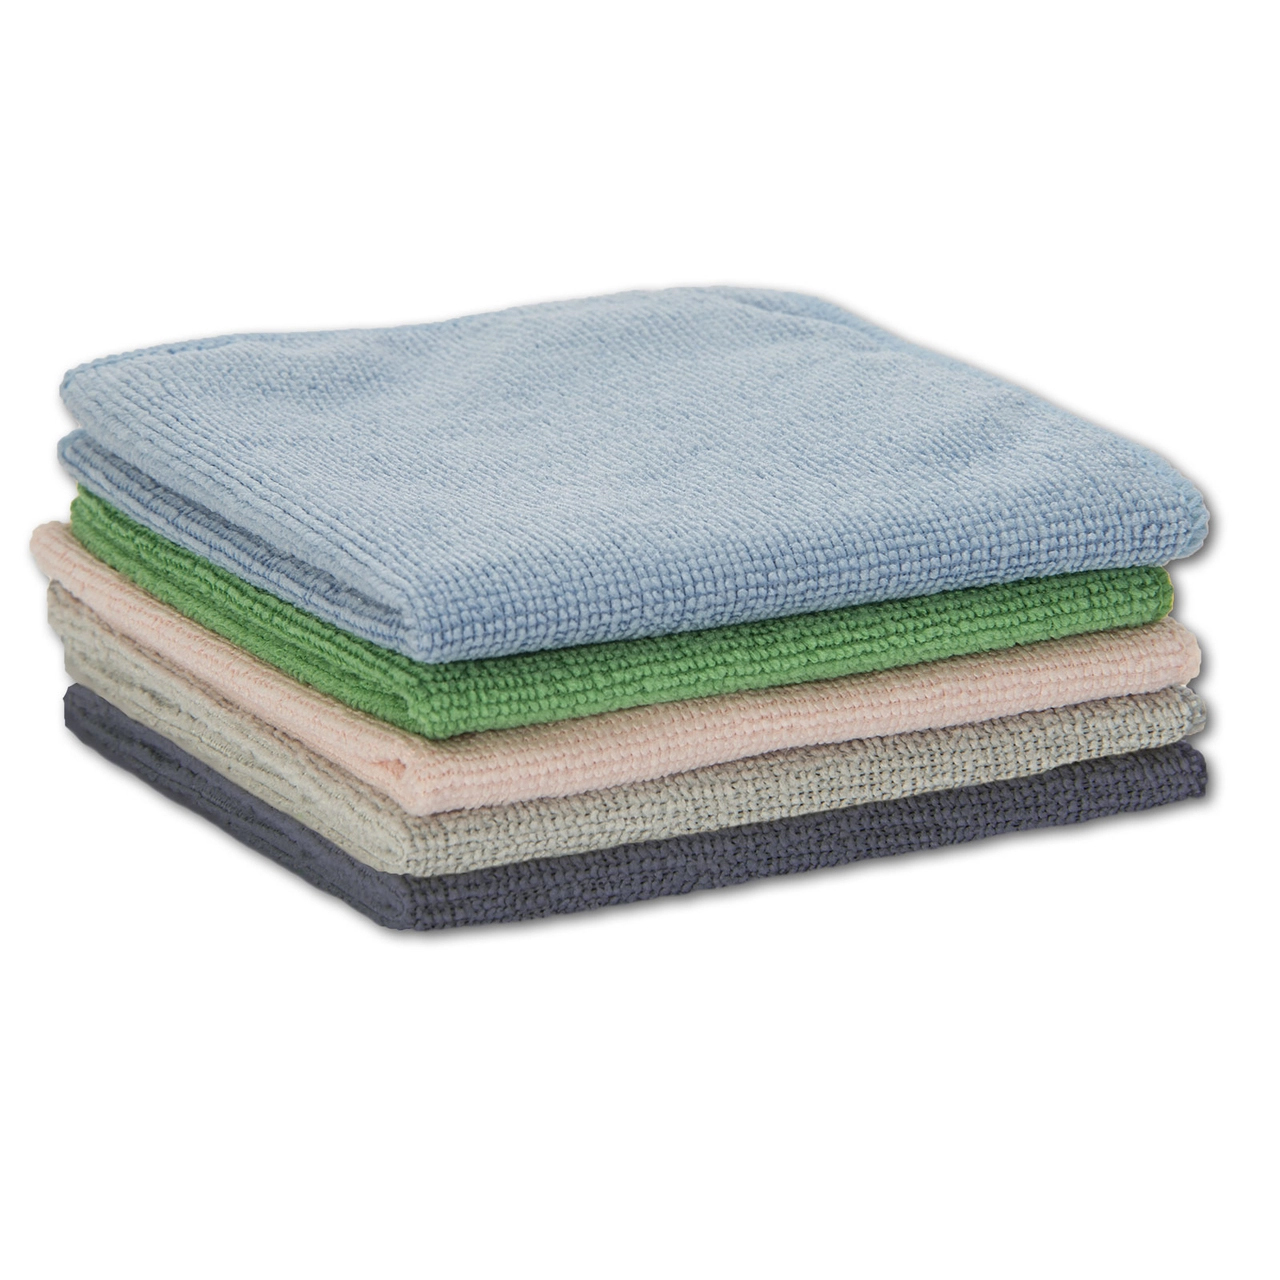 NEW Blue Microfiber Terry Towel Cleaning Cloth, Lint Free & Heavy Duty,  12x12